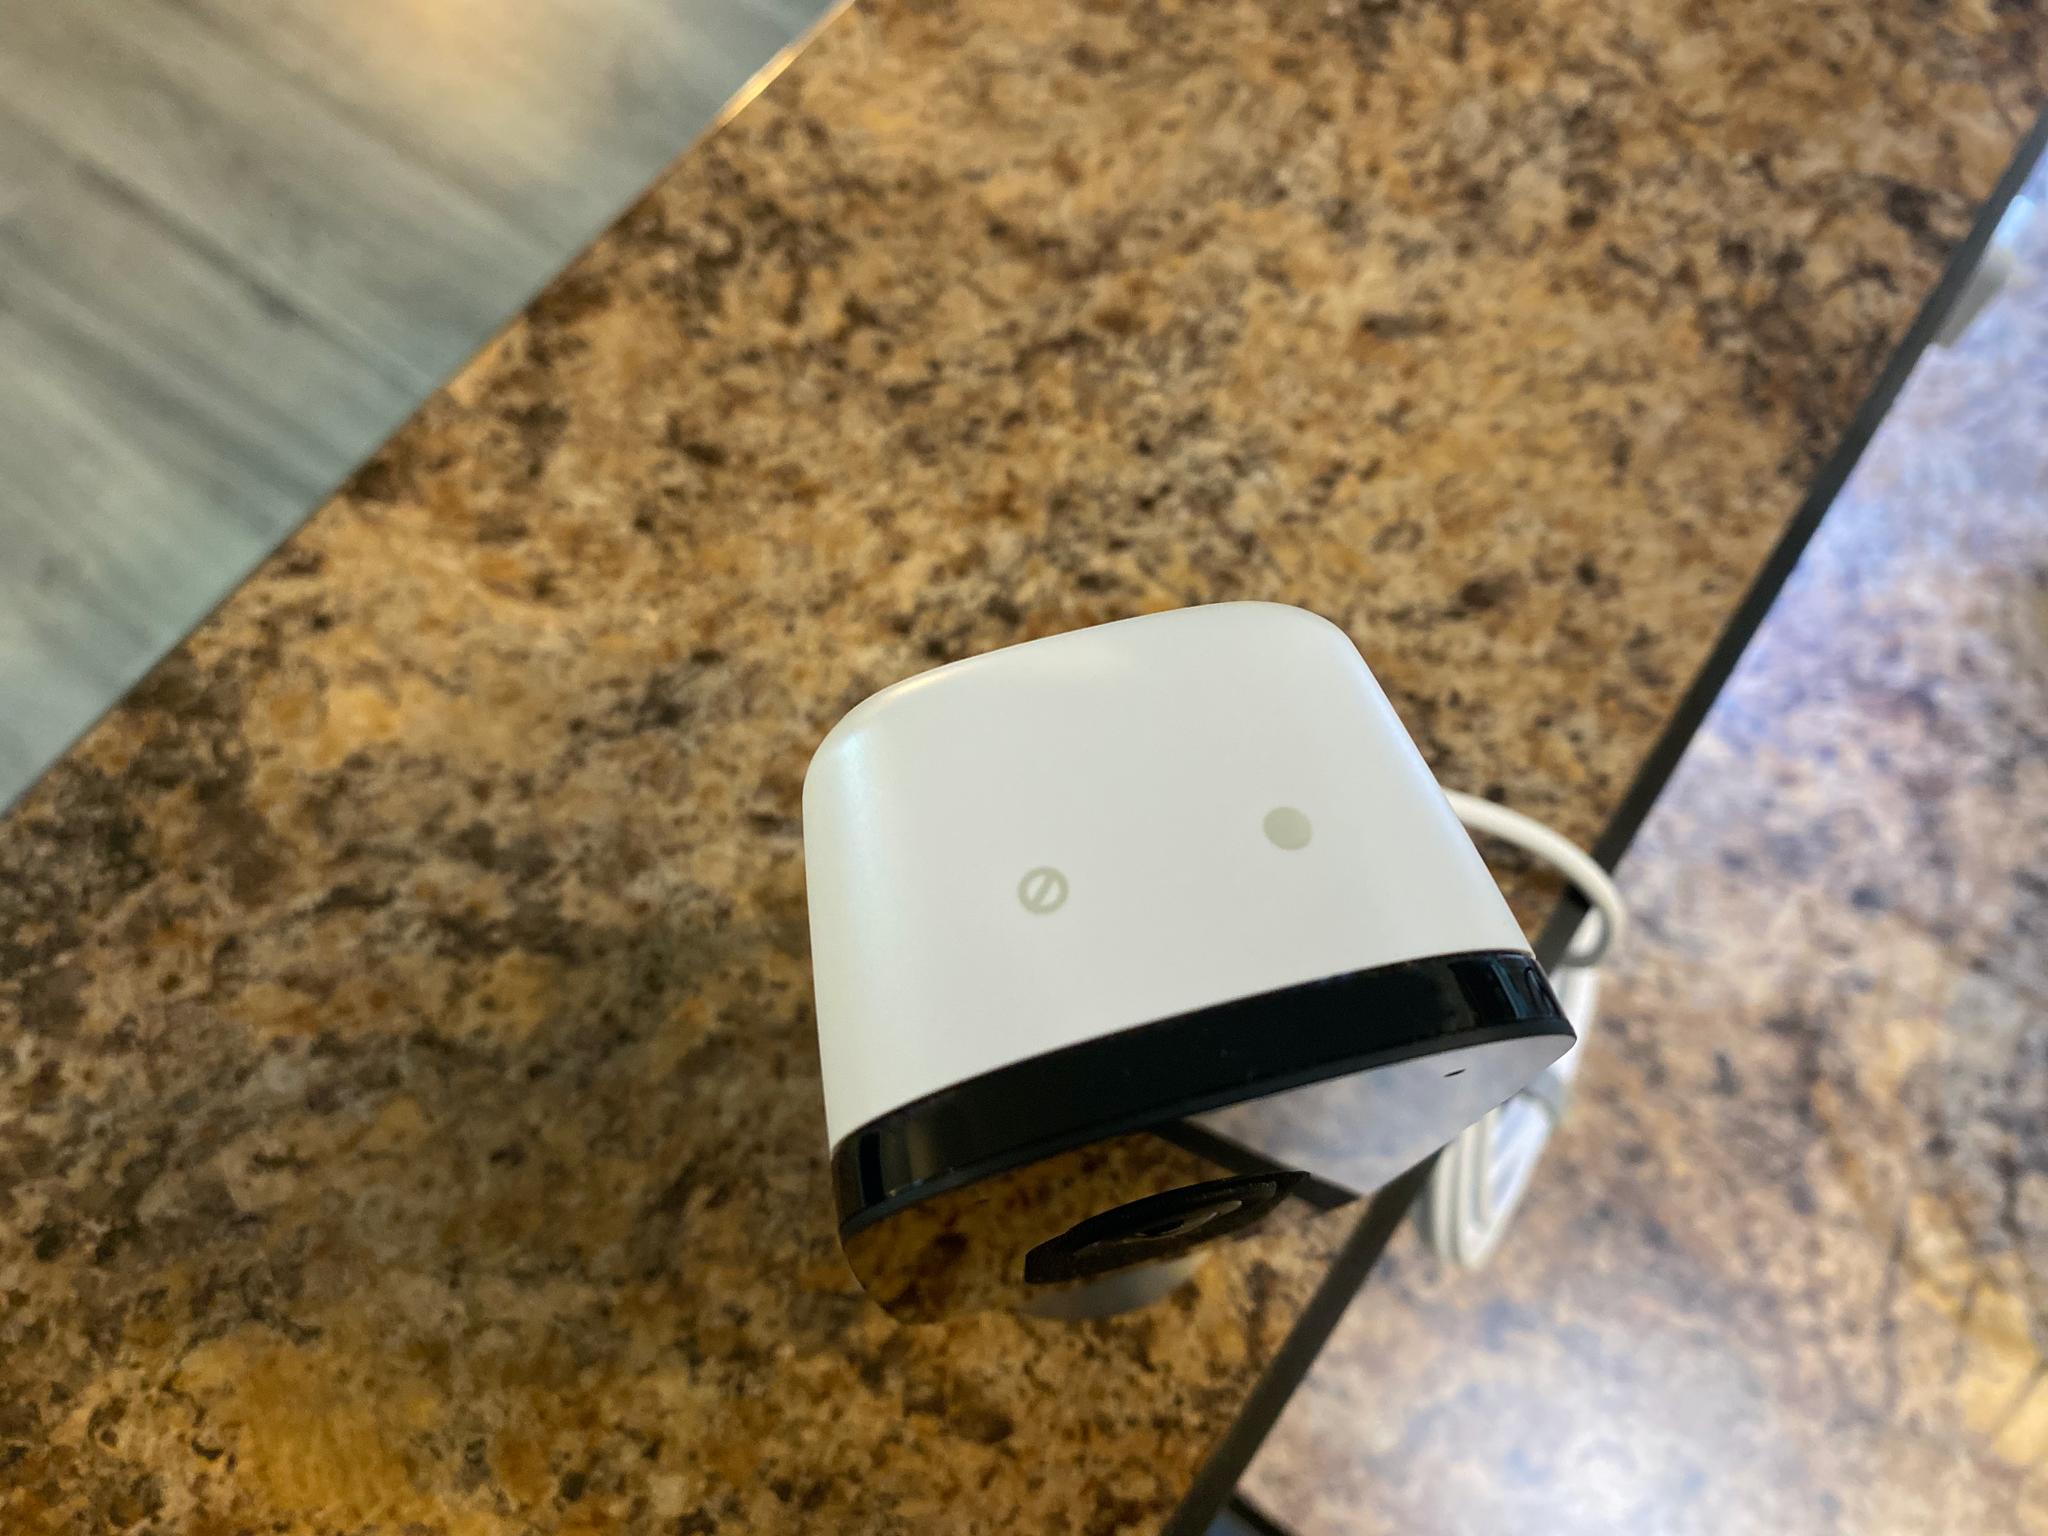 ecobee SmartCamera top view with voice assistant buttons on display